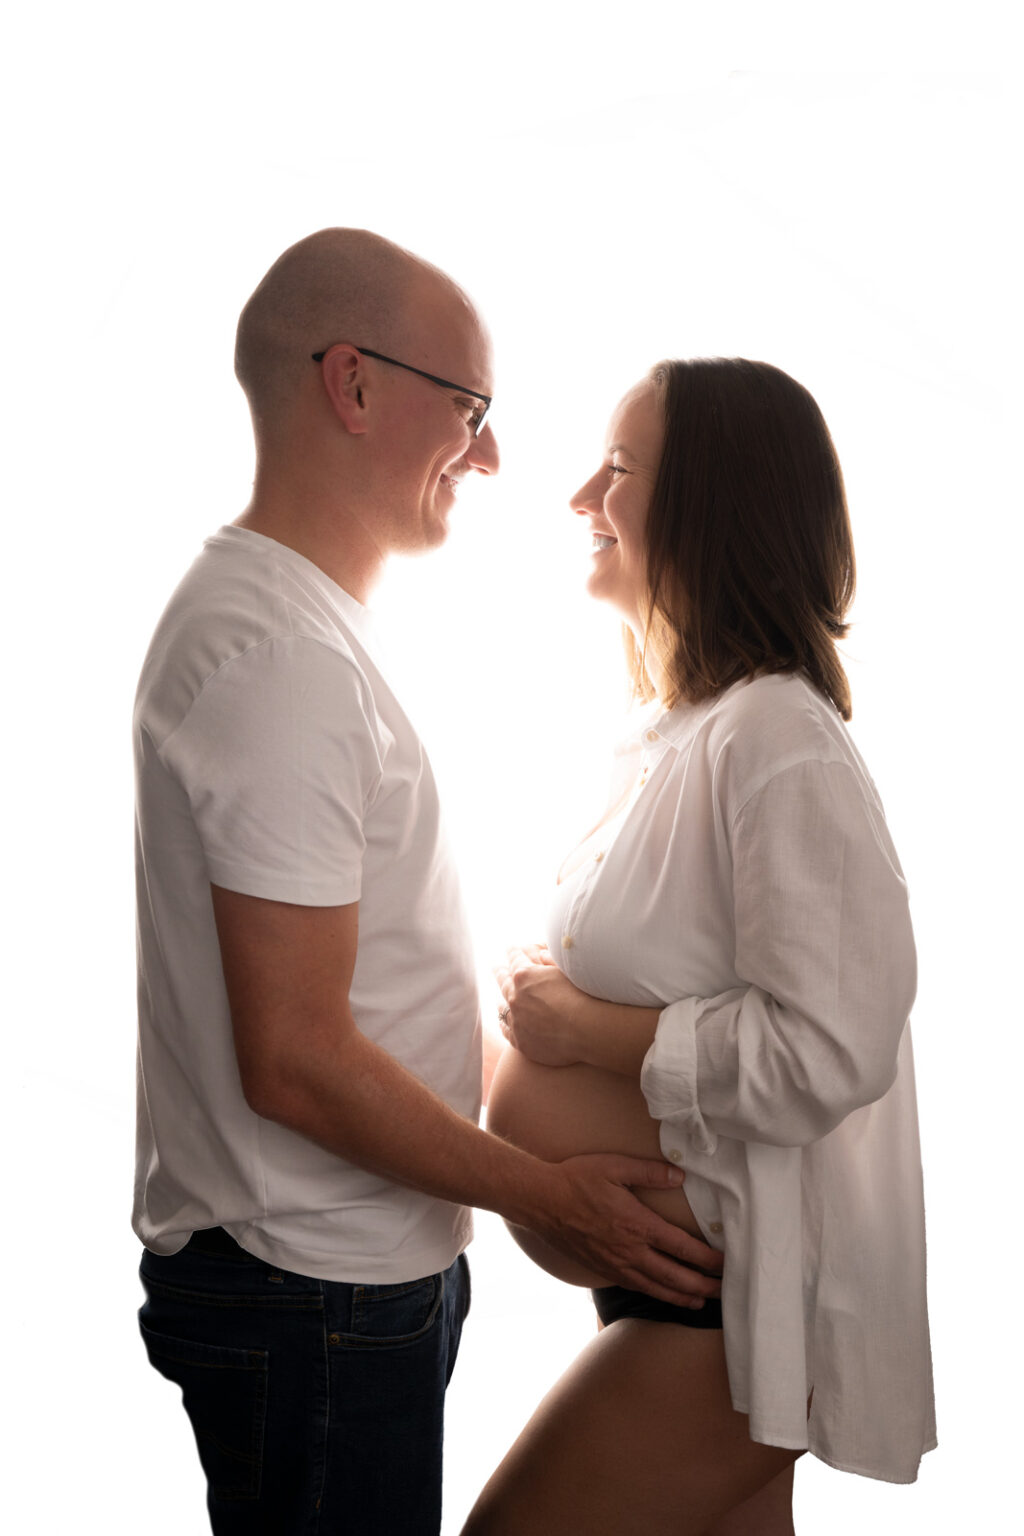 Young couple expecting a baby posing face to face, bump exposed.